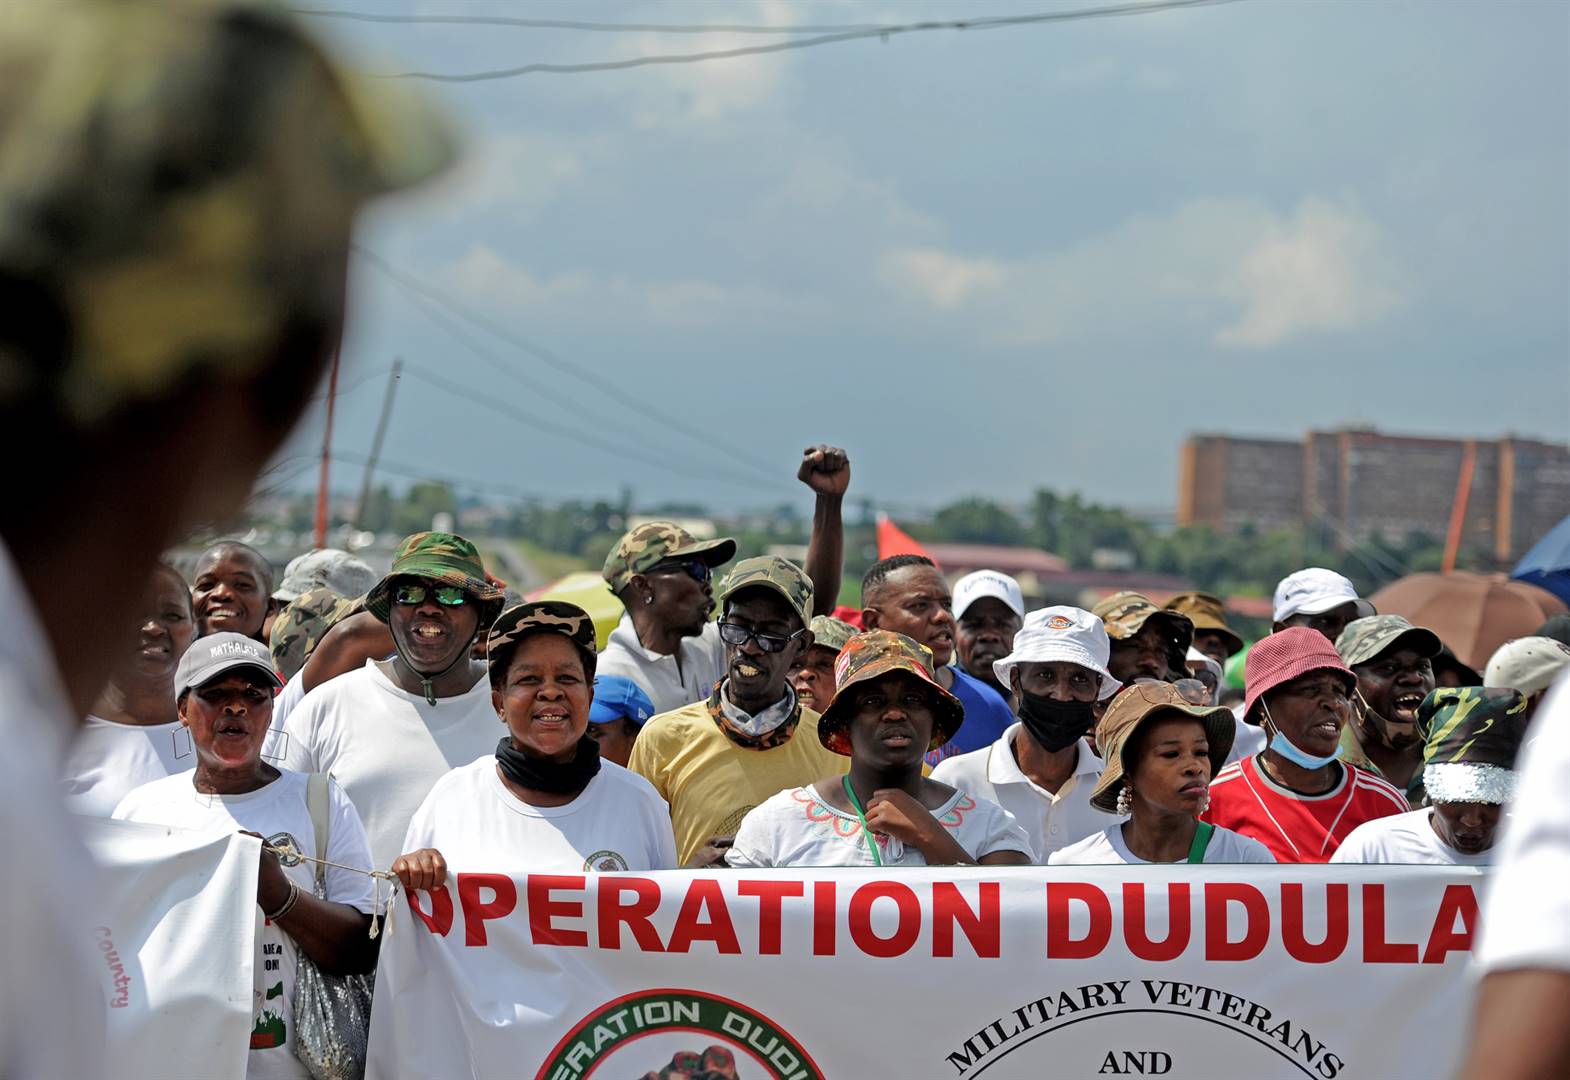 Protesters marching in support of Operation Dudula